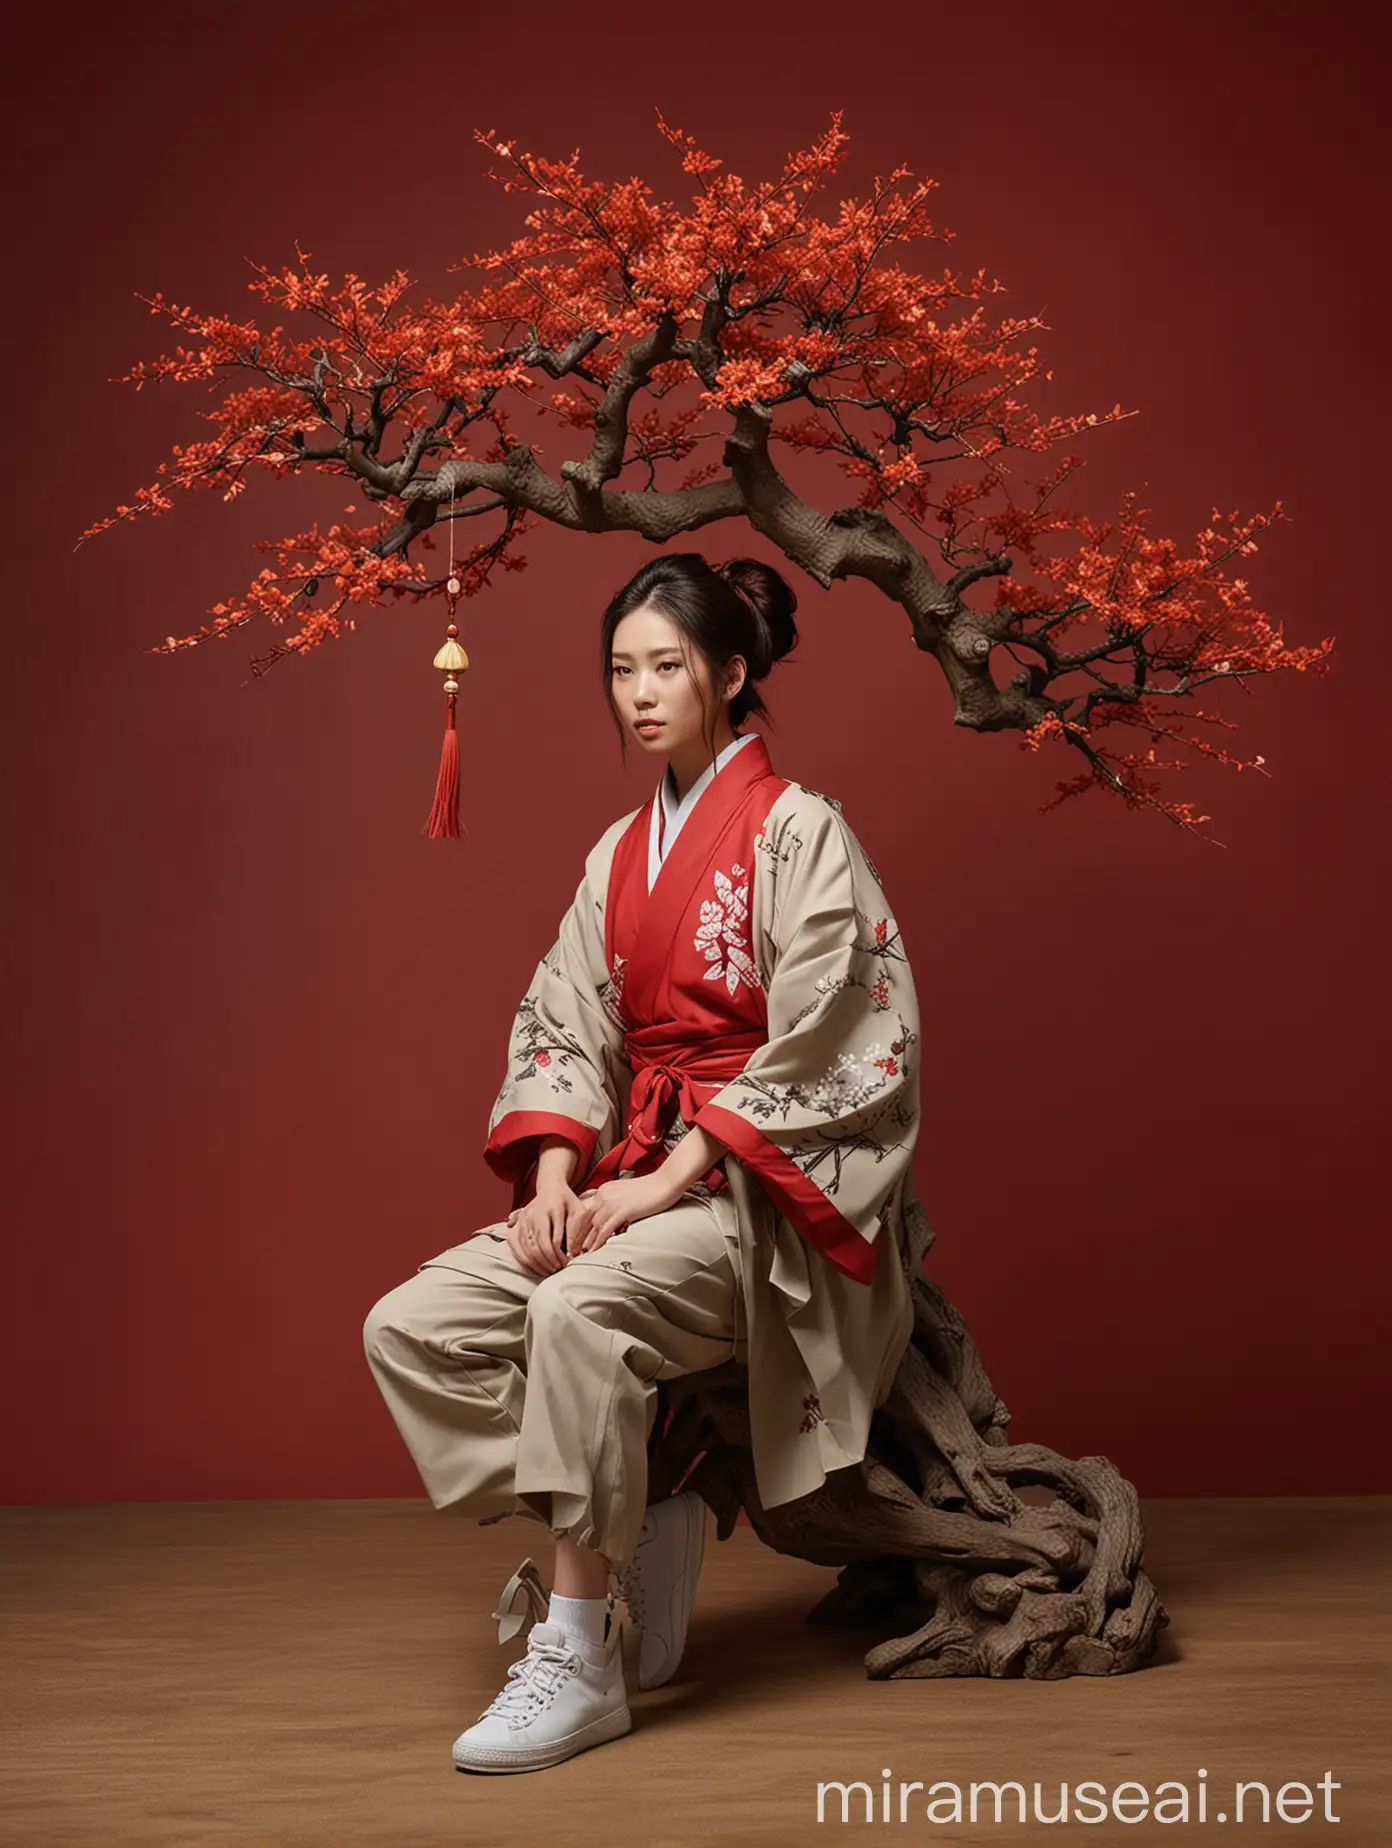 Environment:

Main Branch: Red Backdrop
Sub-Branch 1: Bonsai Set (explore different placements - near model, off to the side)
Alternative Branch: Explore alternative environments that complement the theme (e.g., minimalist Japanese garden, traditional Japanese room with red accents)
Position:

Main Branch: Side Front (classic editorial pose)
Alternative Branch: Explore other dynamic poses that fit the theme (e.g., kneeling with bonsai, walking with panning effect)
Style:

Main Branch: Fashion Editorial (high fashion with a focus on storytelling)
Sub-Branch 1: Streetwear High Fashion (blend high-end fashion with streetwear elements)
Key Element:

Main Branch: Streetwear High Fashion (e.g., oversized jacket, statement sneakers, layered clothing)
Photography Type:

Main Branch: Annie Leibovitz Style (bold compositions, dramatic lighting)
Theme:

Main Branch 1: Japanese Culture
Sub-Branch 1.1: Modern Interpretation (contemporary take on traditional elements)
Sub-Branch 1.2: Classic Inspiration (draw inspiration from iconic Japanese imagery)
Main Branch 2: Streetwear (incorporate streetwear elements seamlessly with the Japanese theme)
Visual Filters:

Main Branch: Lens Flare (subtle for a classic Leibovitz look)
Camera Effects:

Main Branch: Panning (create a sense of movement and dynamism)
Alternative Branch: Explore other effects that complement the theme (e.g., slow motion, close-ups)
Time:

Main Branch: Night Time (dramatic and moody atmosphere)
Resolution:

Main Branch: 8k (ultra-high definition for intricate details)
Details:

Main Branch: Very Intricate Details (focus on clothing texture, makeup, hair)
Additional Considerations:

Facial Expression: Confident, powerful (to match the high fashion theme)
Props: Explore props that enhance the theme (e.g., Japanese fan, origami crane)
Color Palette: Explore color palettes that complement the red backdrop and Japanese theme